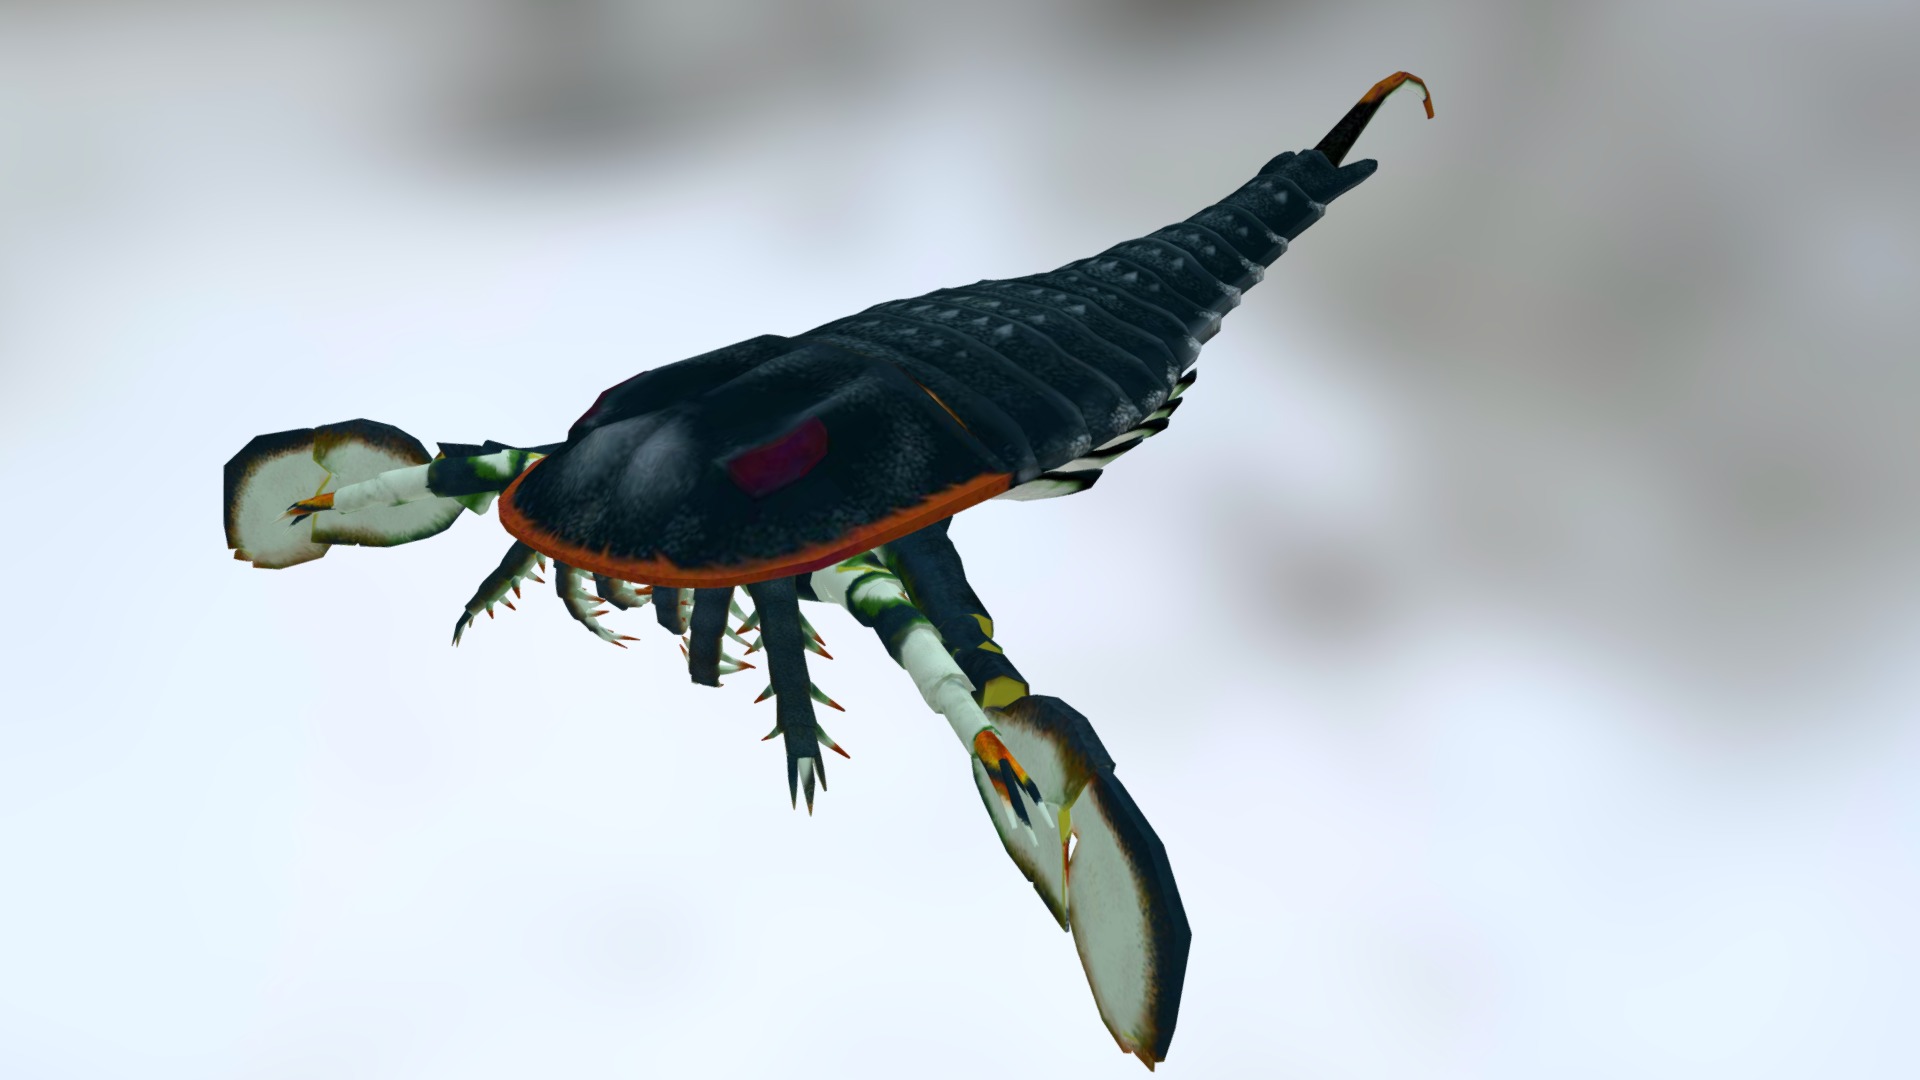 3D model Eurypterus - This is a 3D model of the Eurypterus. The 3D model is about a bird flying with a fish in its mouth.